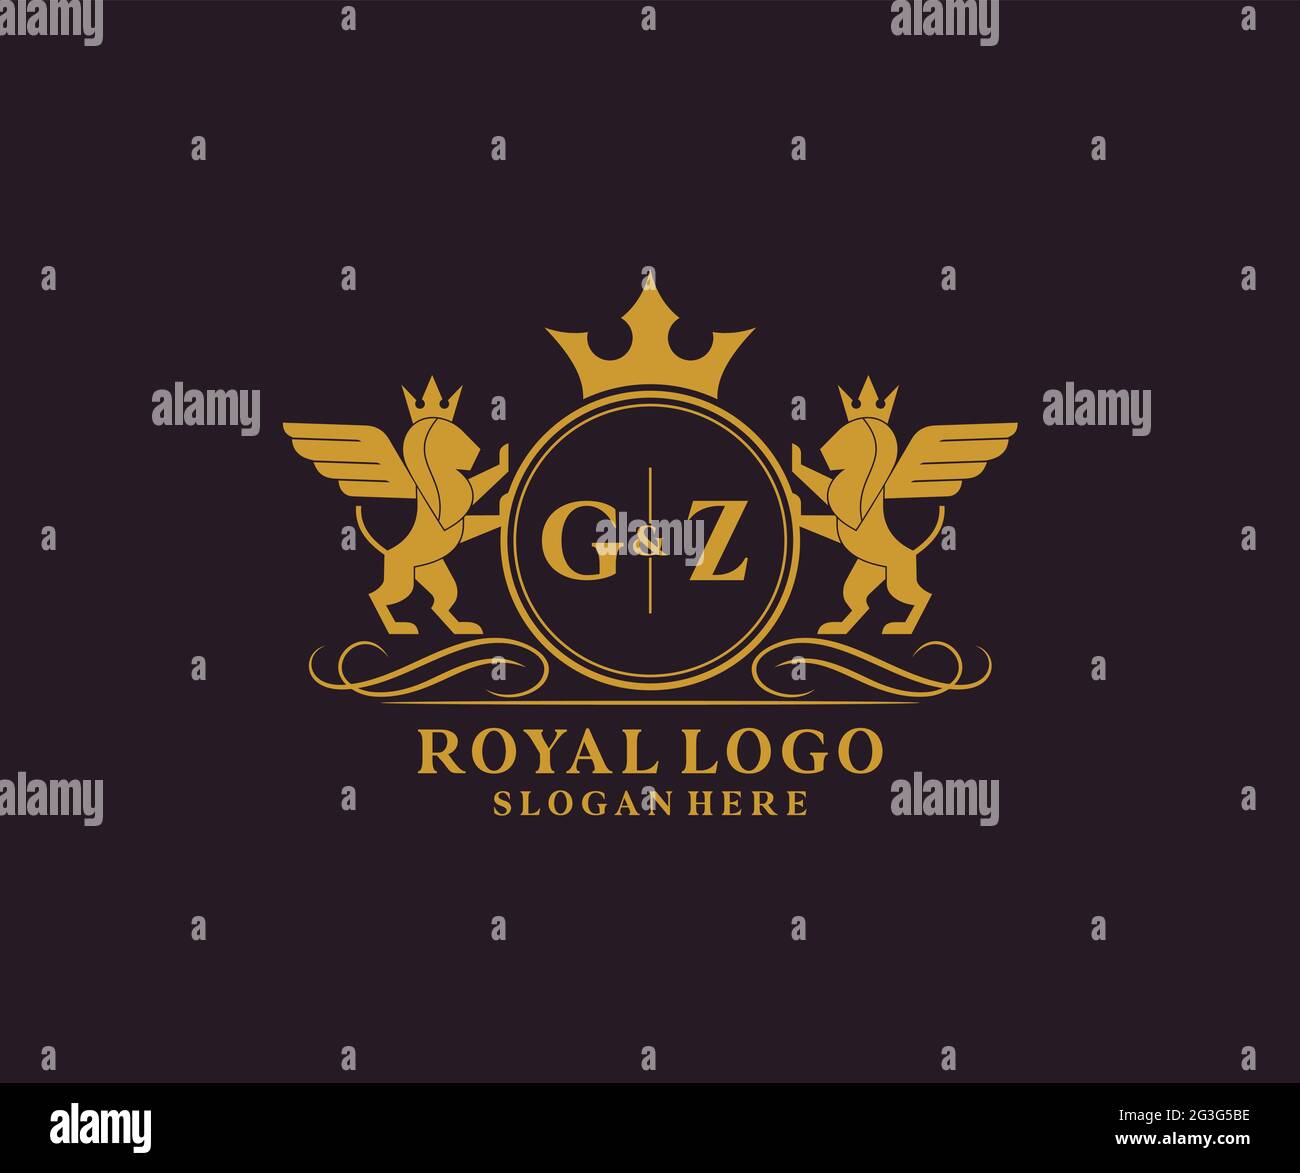 GZ Letter Lion Royal Luxury Heraldic,Crest Logo template in vector art for Restaurant, Royalty, Boutique, Cafe, Hotel, Heraldic, Jewelry, Fashion and Stock Vector